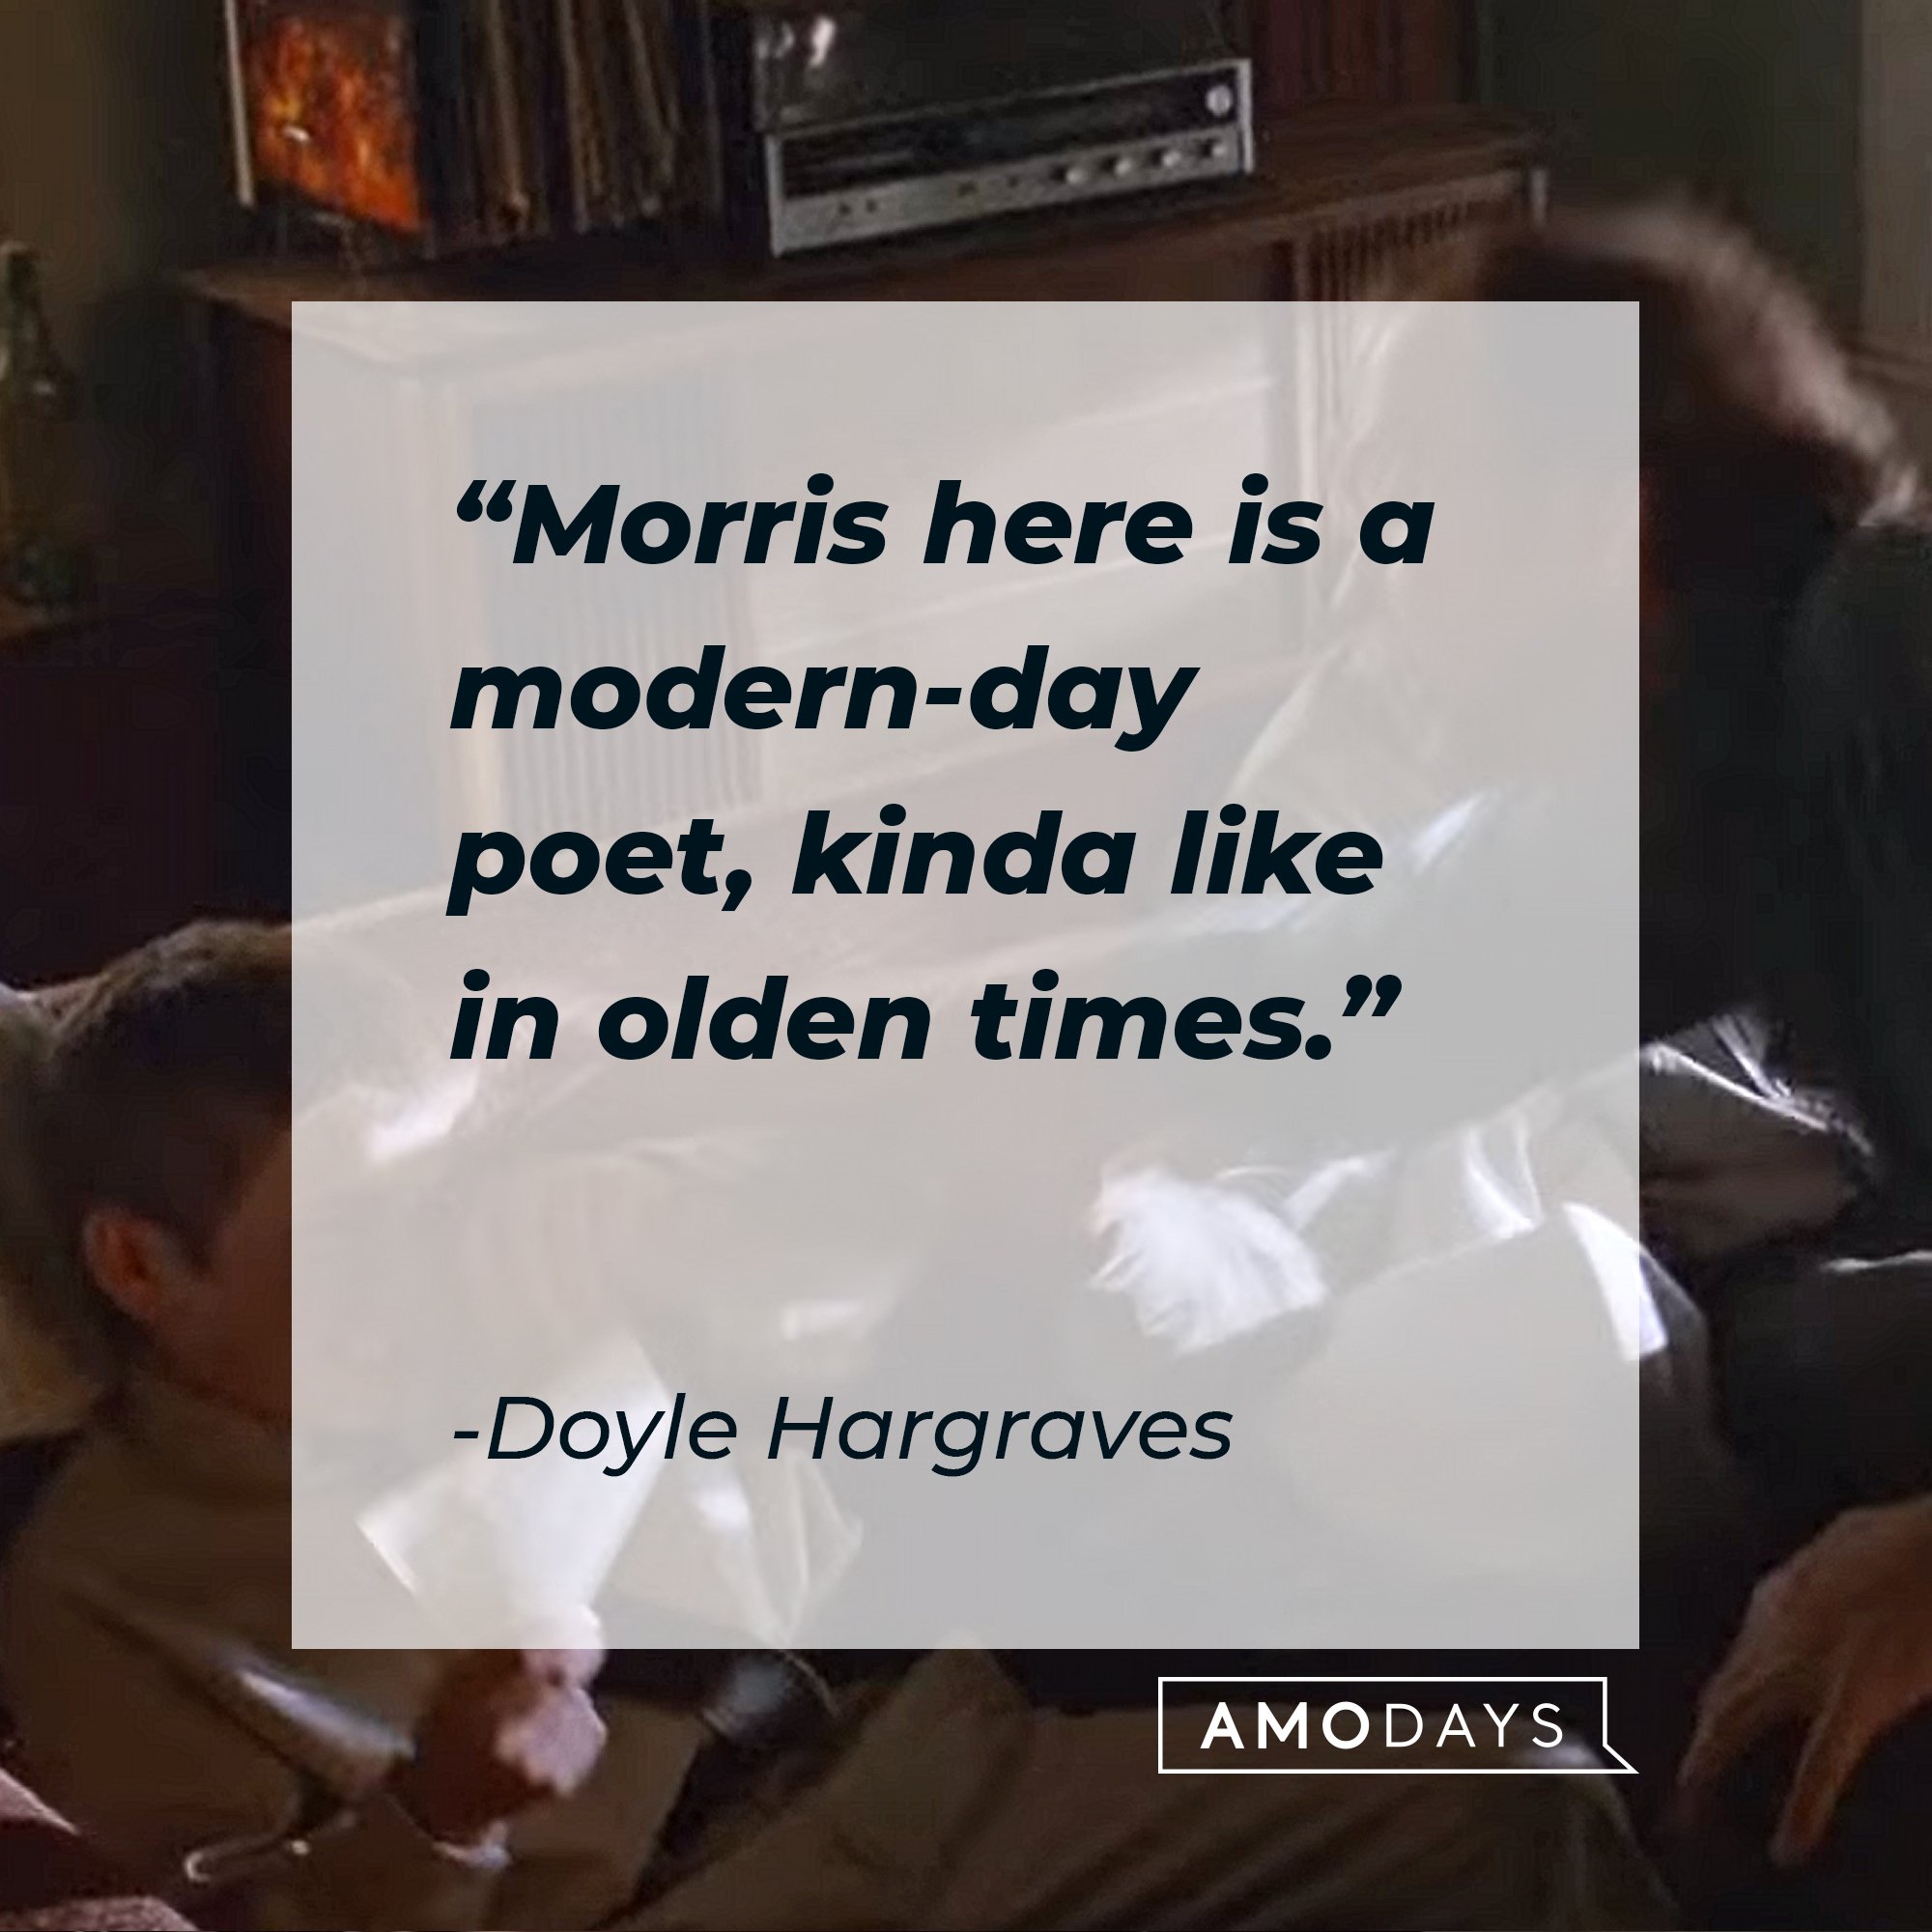 Doyle Hargraves' quote: "Morris here is a modern-day poet, kinda like in olden times.” | Image: AmoDays